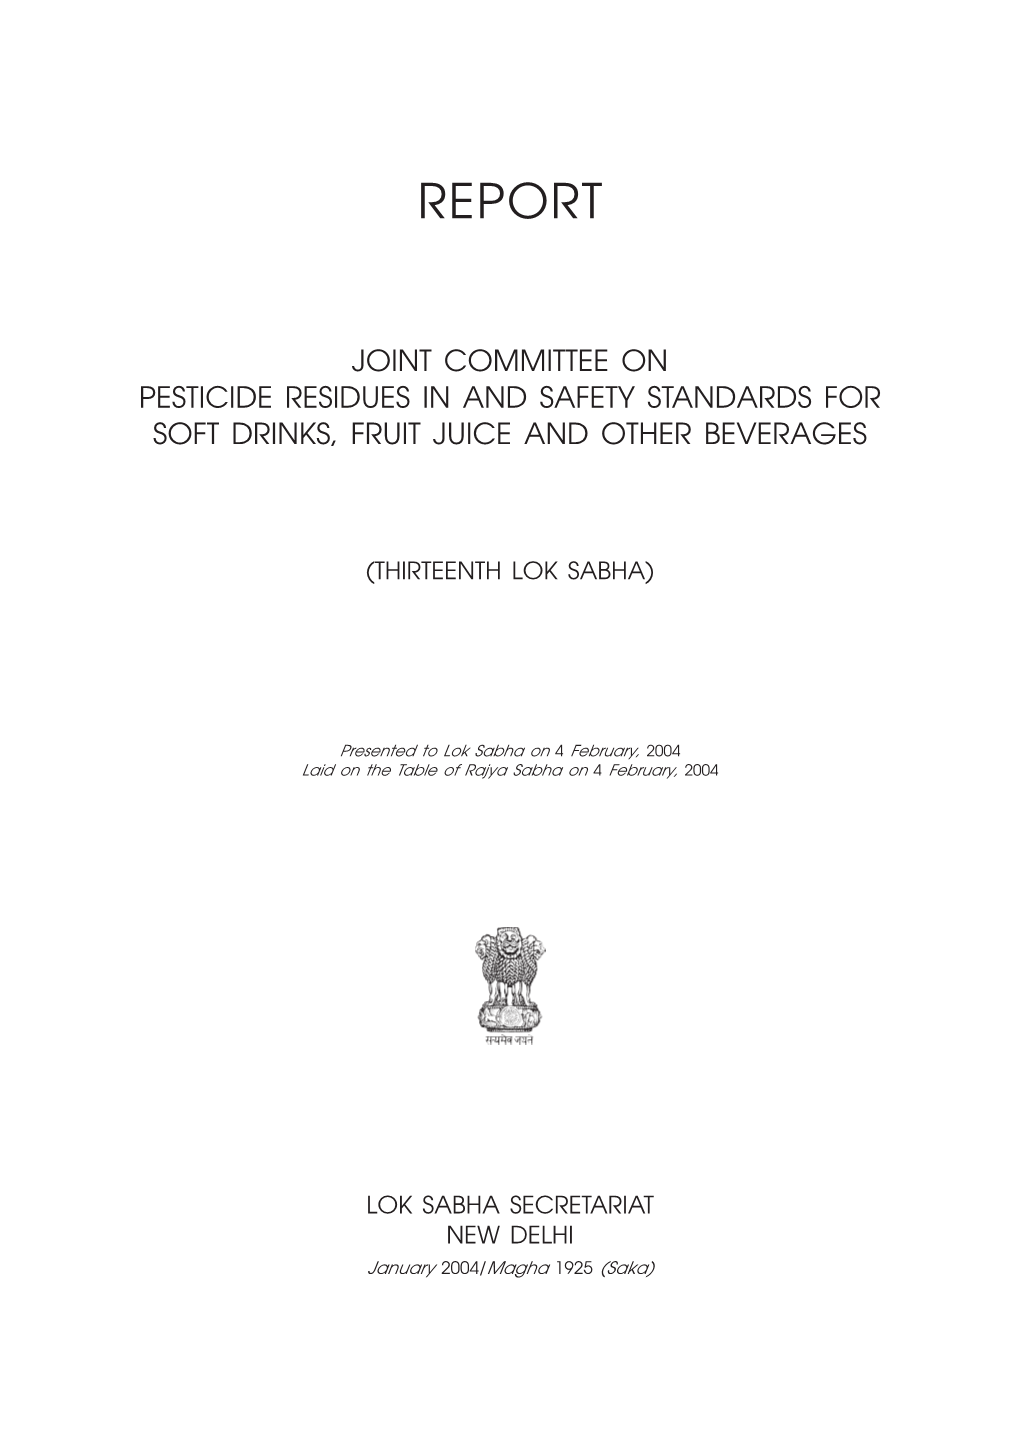 JPC on Pesticide Residues in and Safety Standard for Soft Drinks, Fruit Juice and Other Beverages